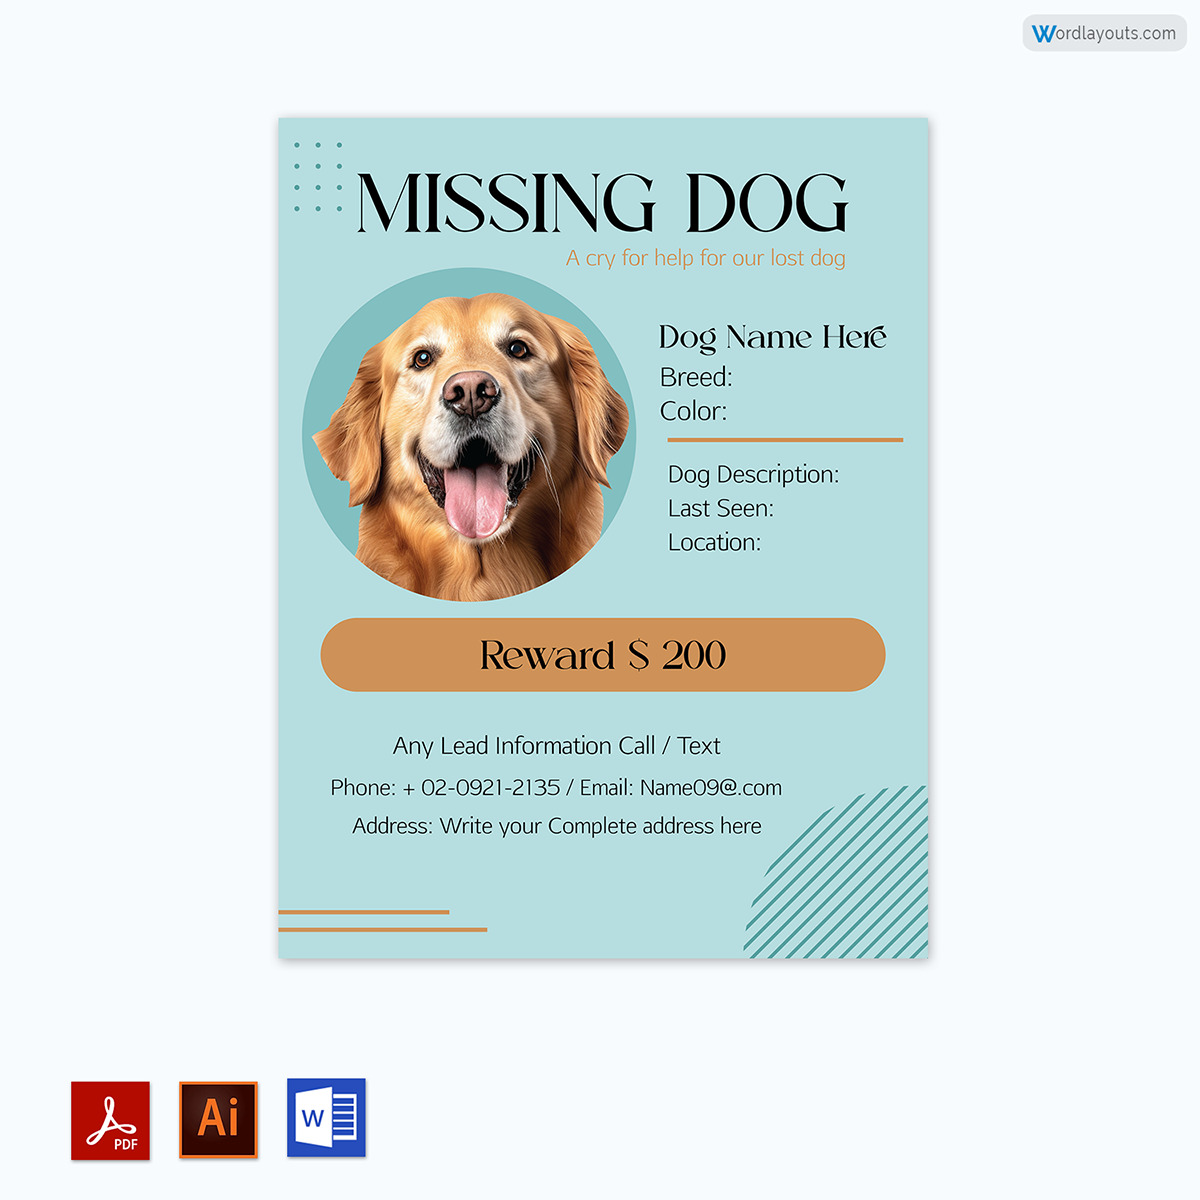 Dog Lost Flyer Template-3r57603-07-23-p01